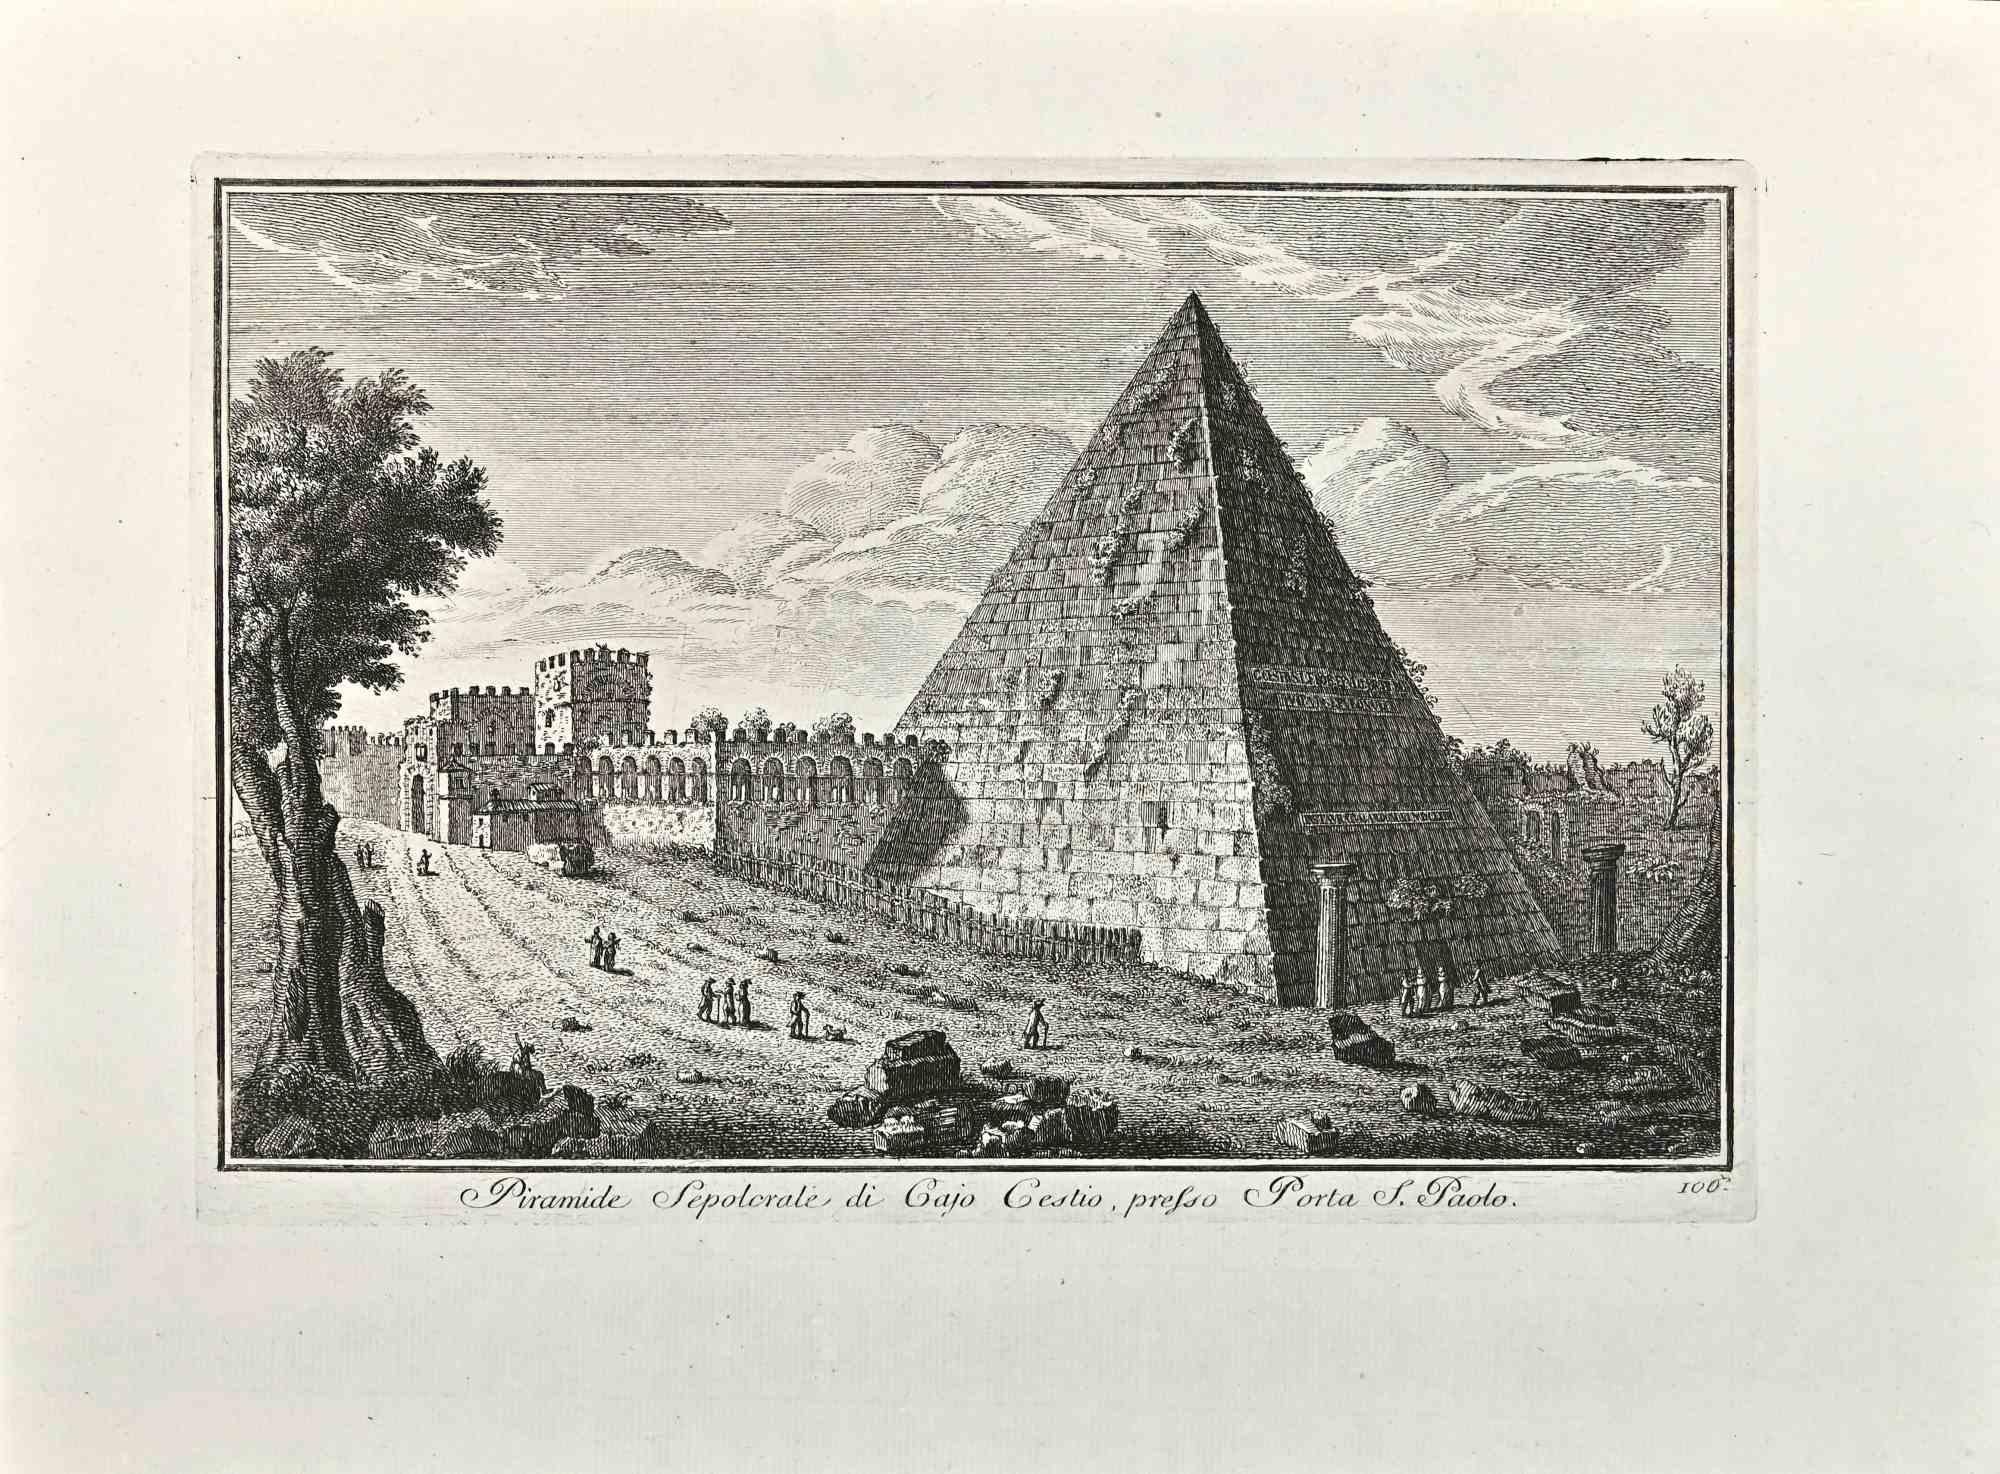 Piramide - Porta S.Paolo is an original etching of the Late 18th century realized by Giuseppe Vasi.

Signed and titled on plate lower margin. 

Good conditions.

Giuseppe Vasi  (Corleone,1710 - Rome, 1782) was an engraver, architect, and landscape